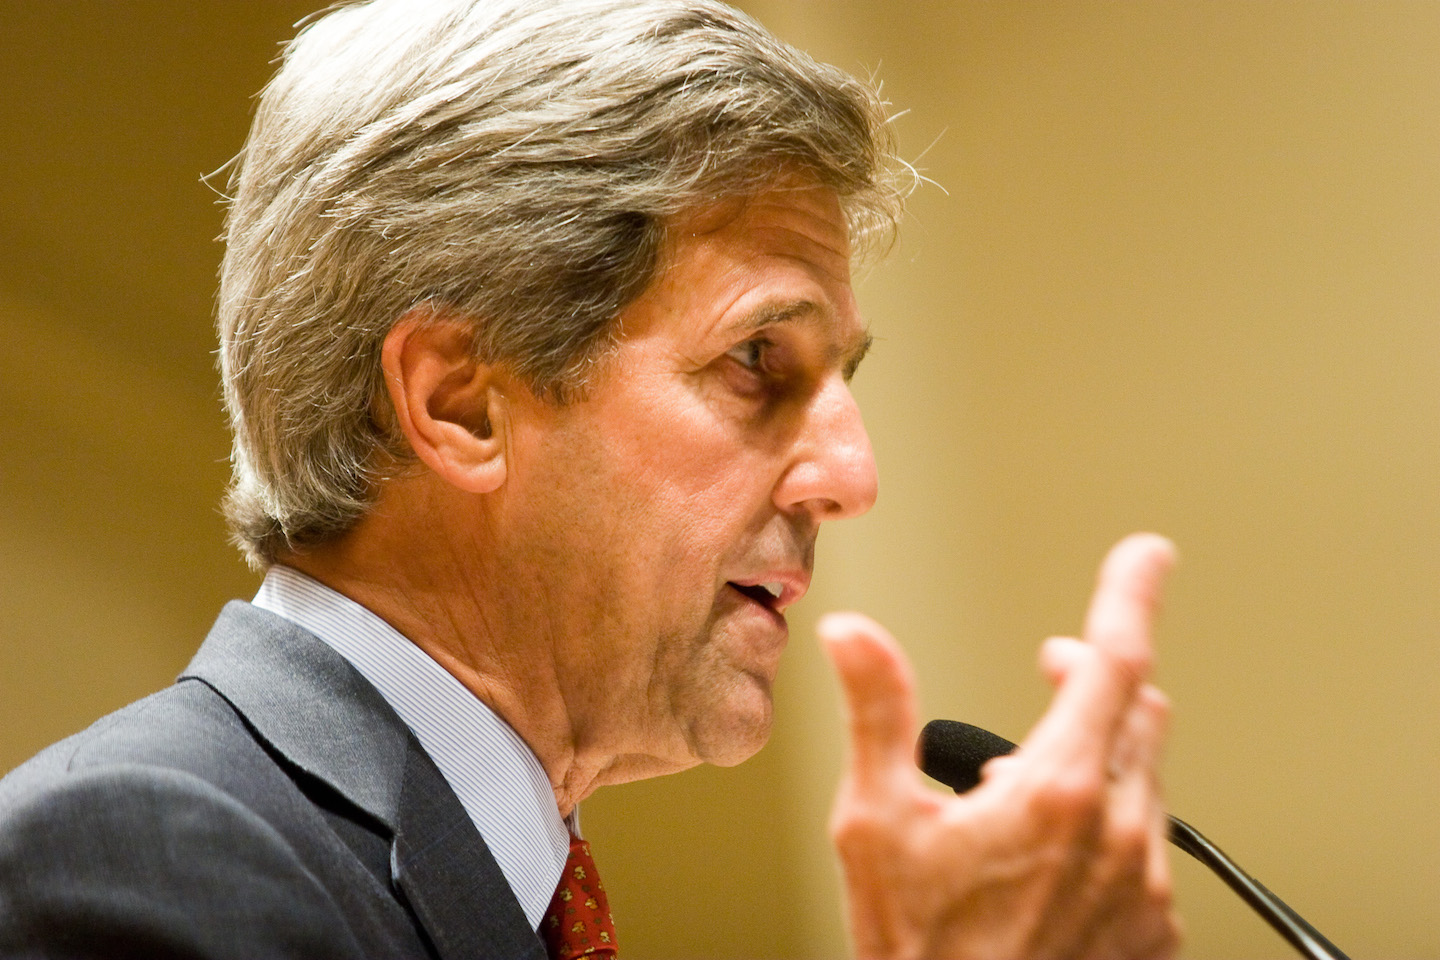 Image: SNOPES caught misleading readers about key facts related to charity funding for John Kerry’s daughter